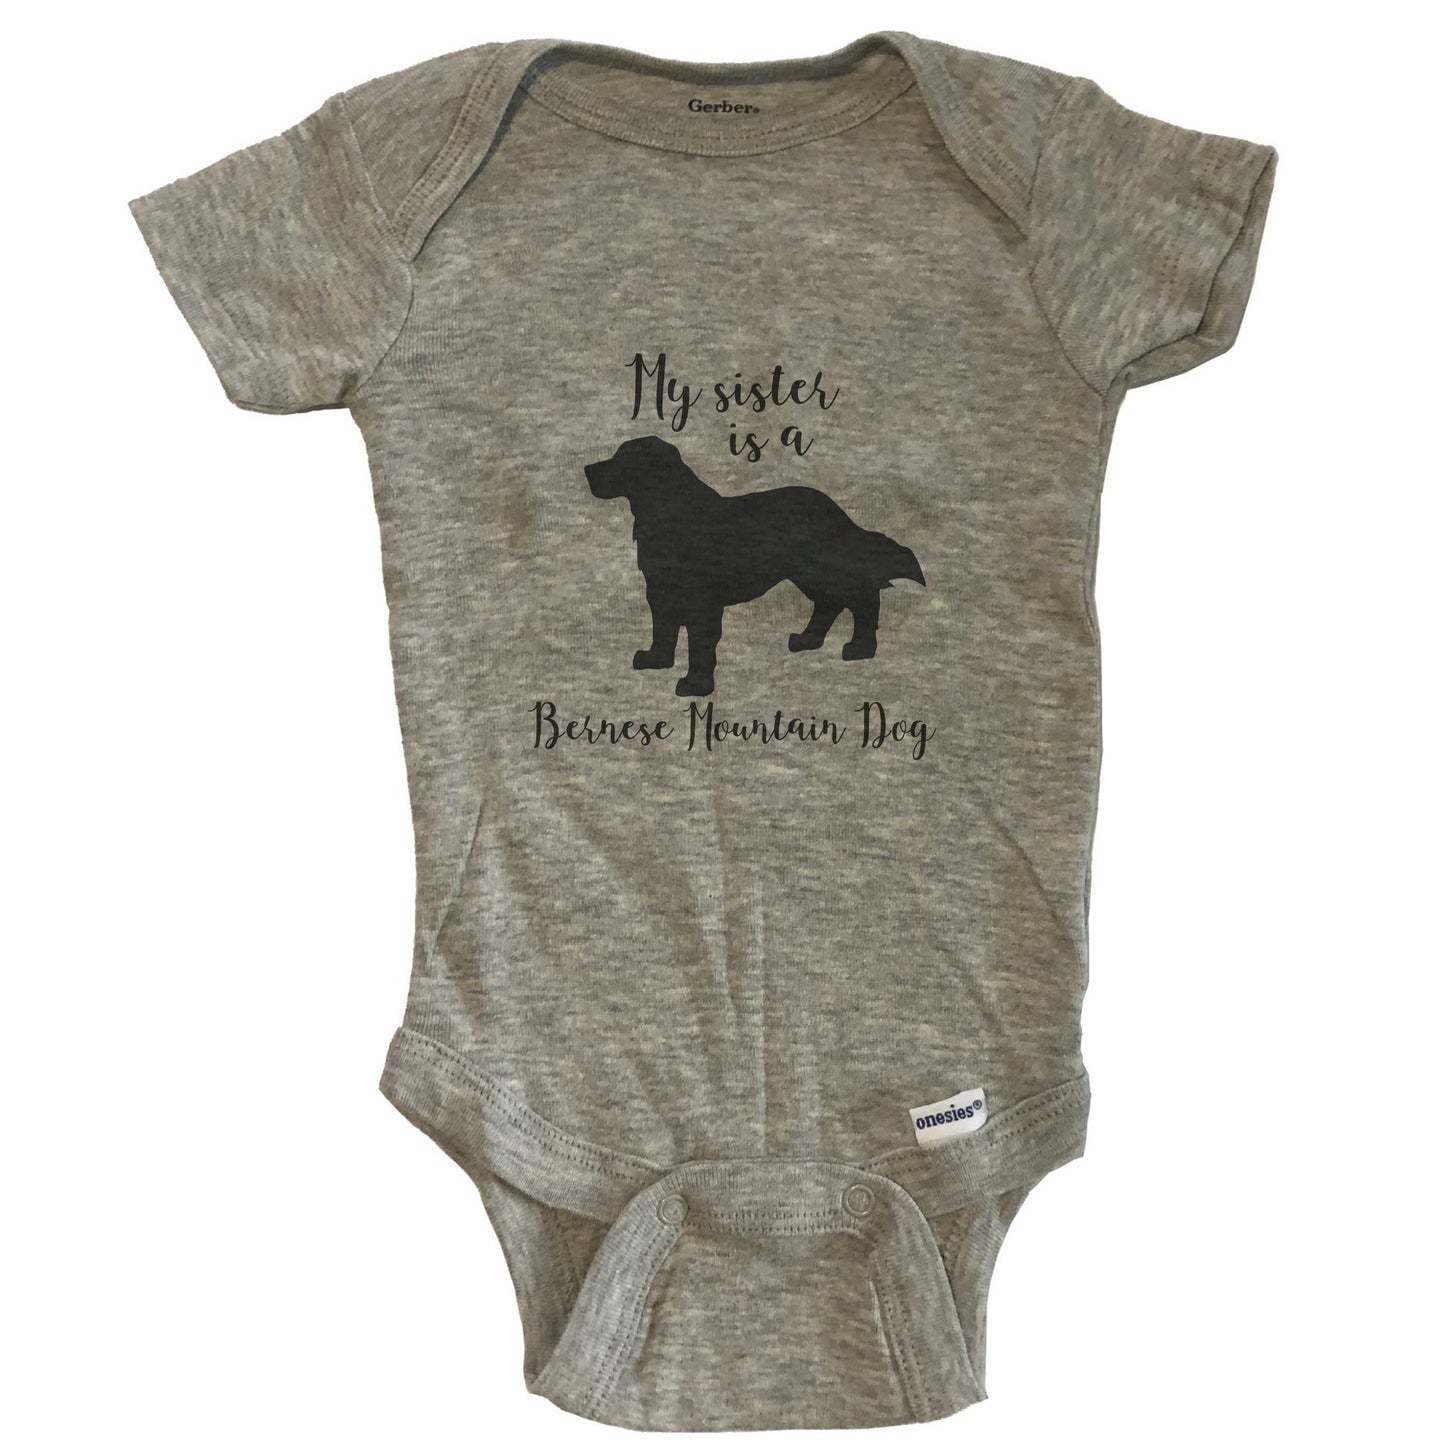 My Sister Is A Bernese Mountain Dog Cute Dog Baby Onesie - Bernese Mountain Dog One Piece Baby Bodysuit